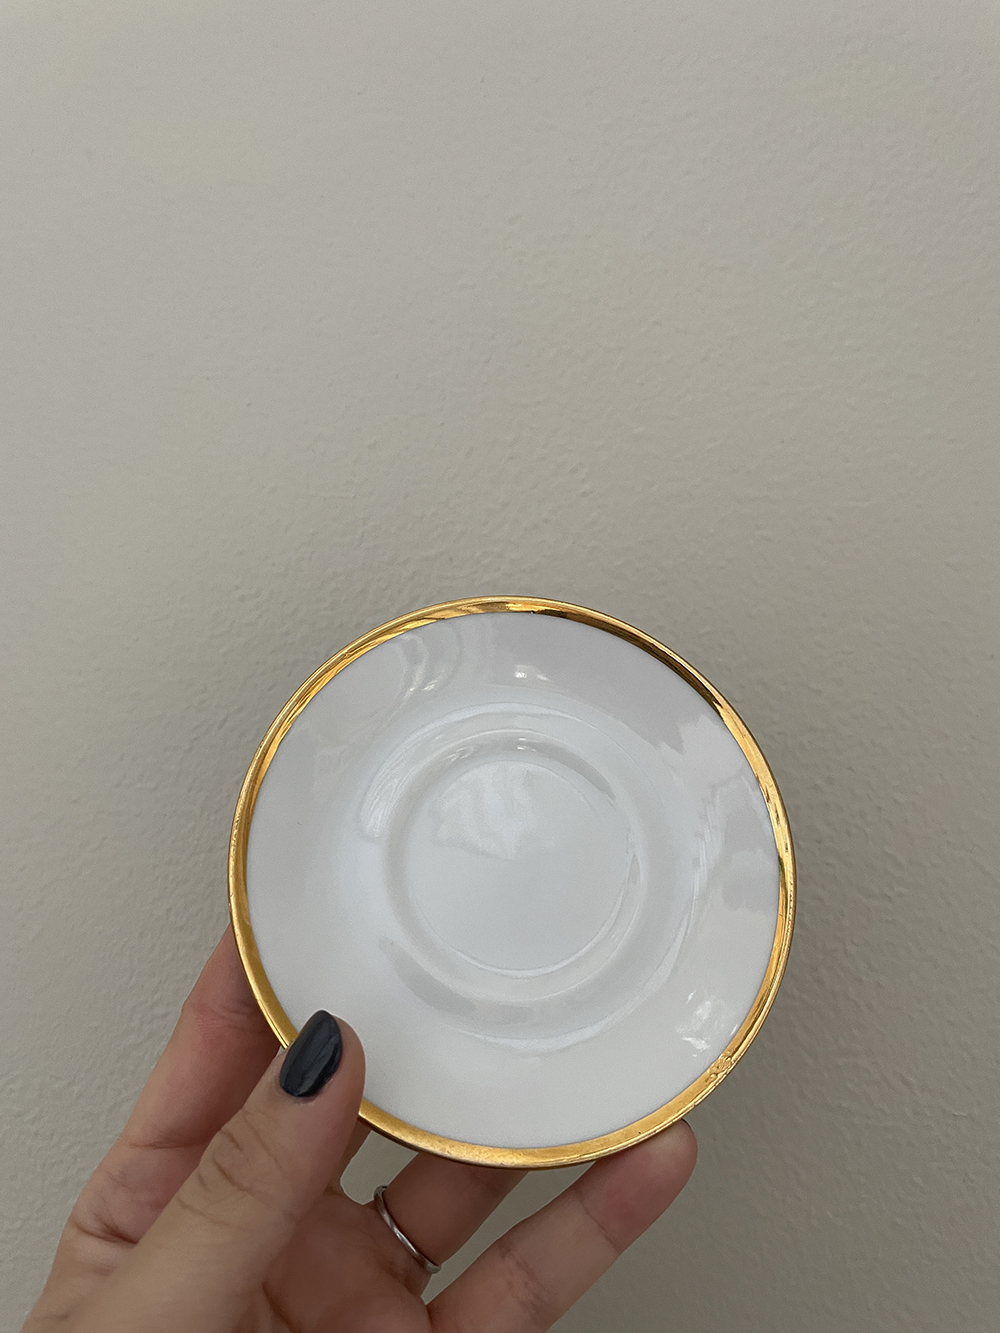 Thrifting for Gifts & Entertaining - roomfortuesday.com